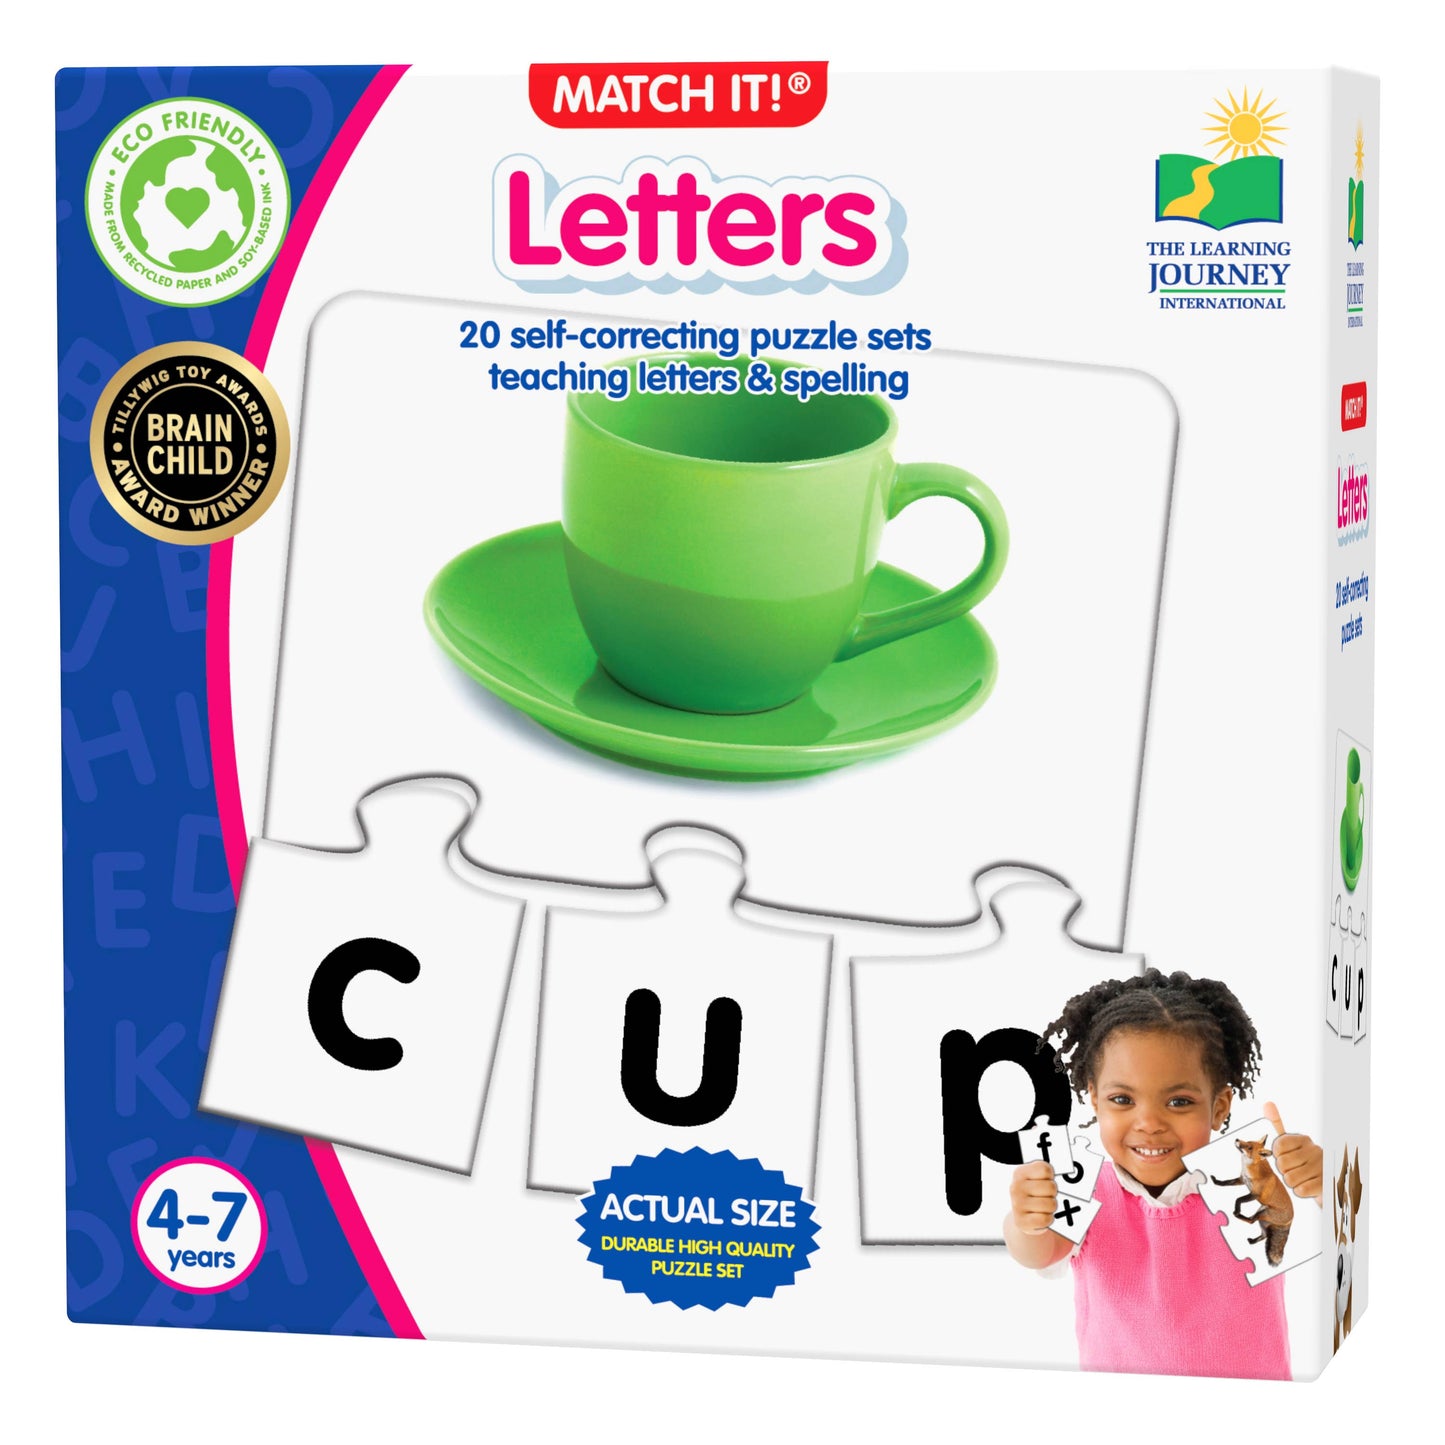 Match It! Letters - Self-Correcting Spelling Puzzles